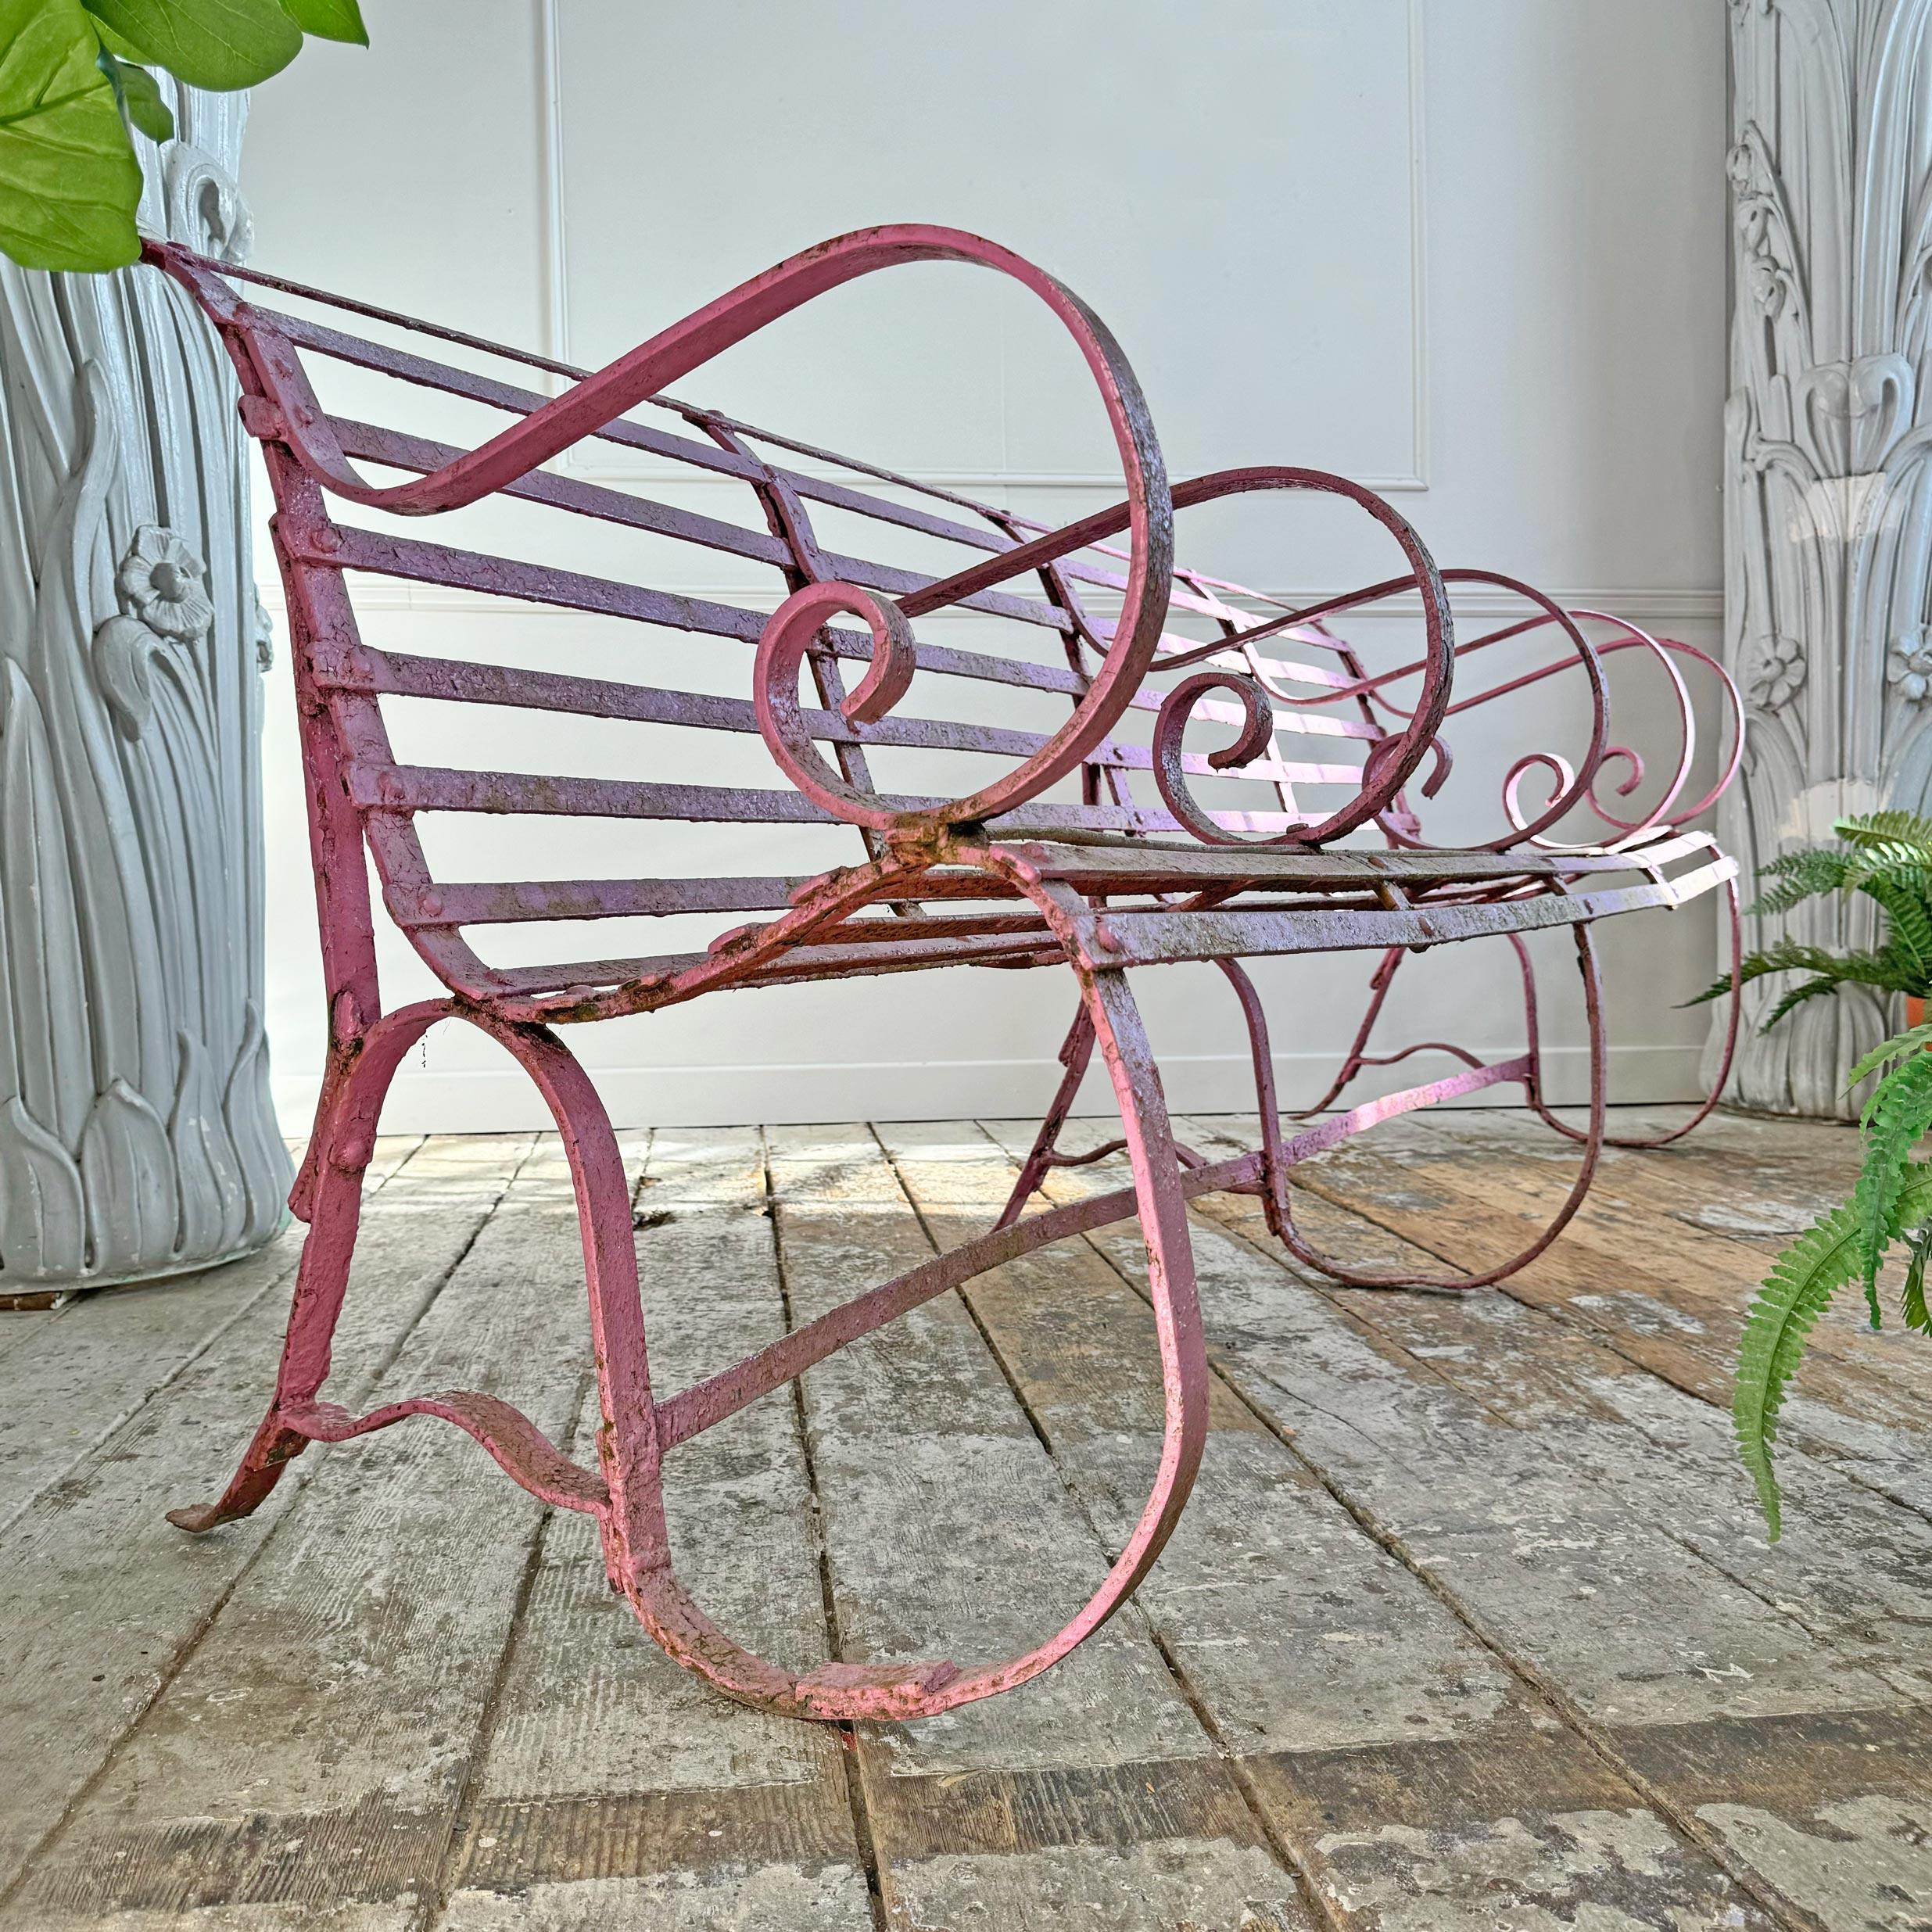 Pretty In PINK!



A one of a kind 4 seat early Victorian scroll arm bench, dating to the early 1800's, this stunning later Regency / Early Victorian heavy strapwork iron bench is painted in the most brilliant soft pink/ lilac paint, unsure when